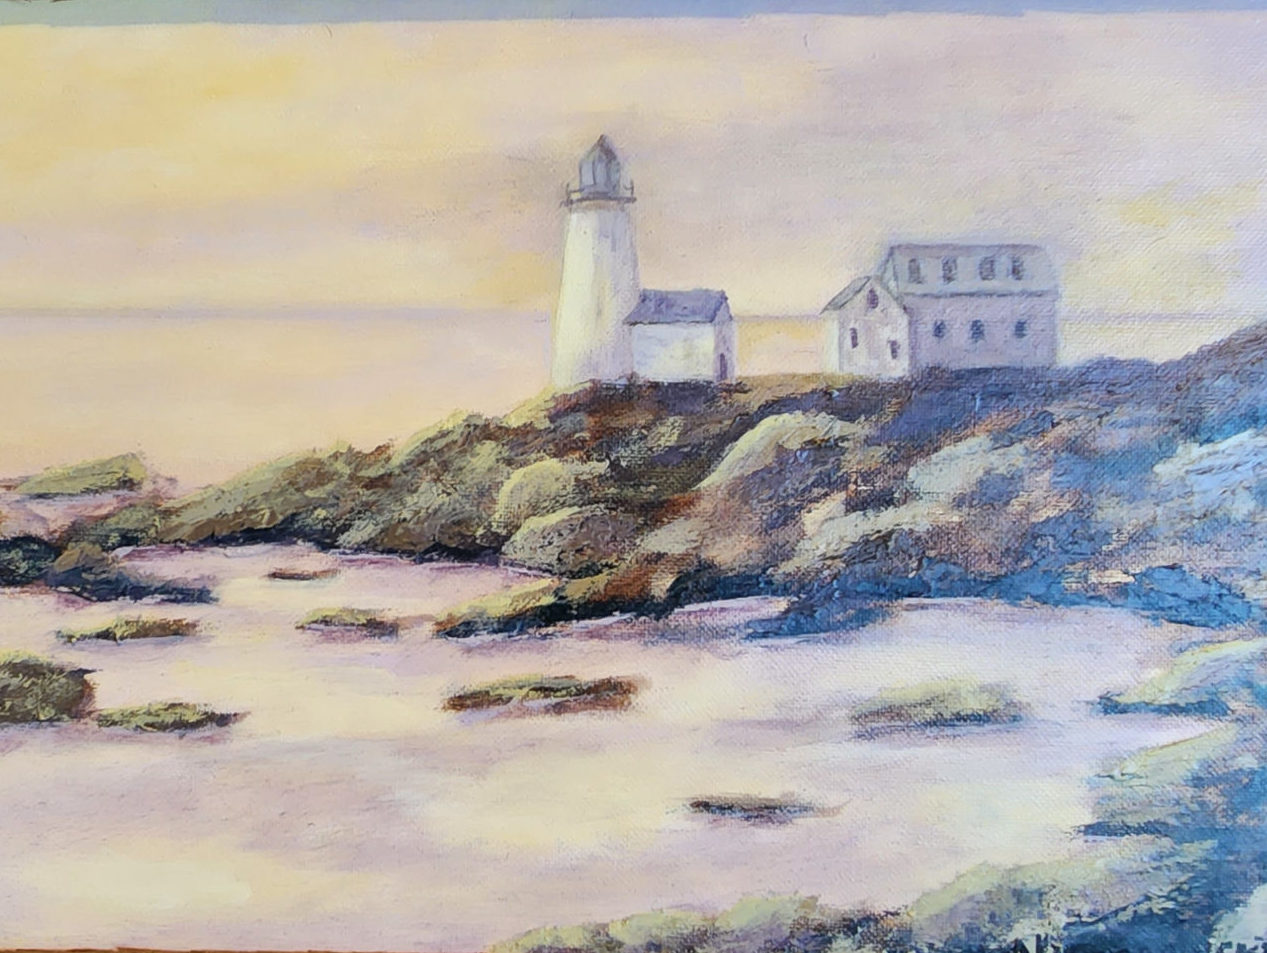 A painting by Bill Nieranowski entitled, "Life on the Rocks," featuring a lighthouse along a rocky coastline in soft light